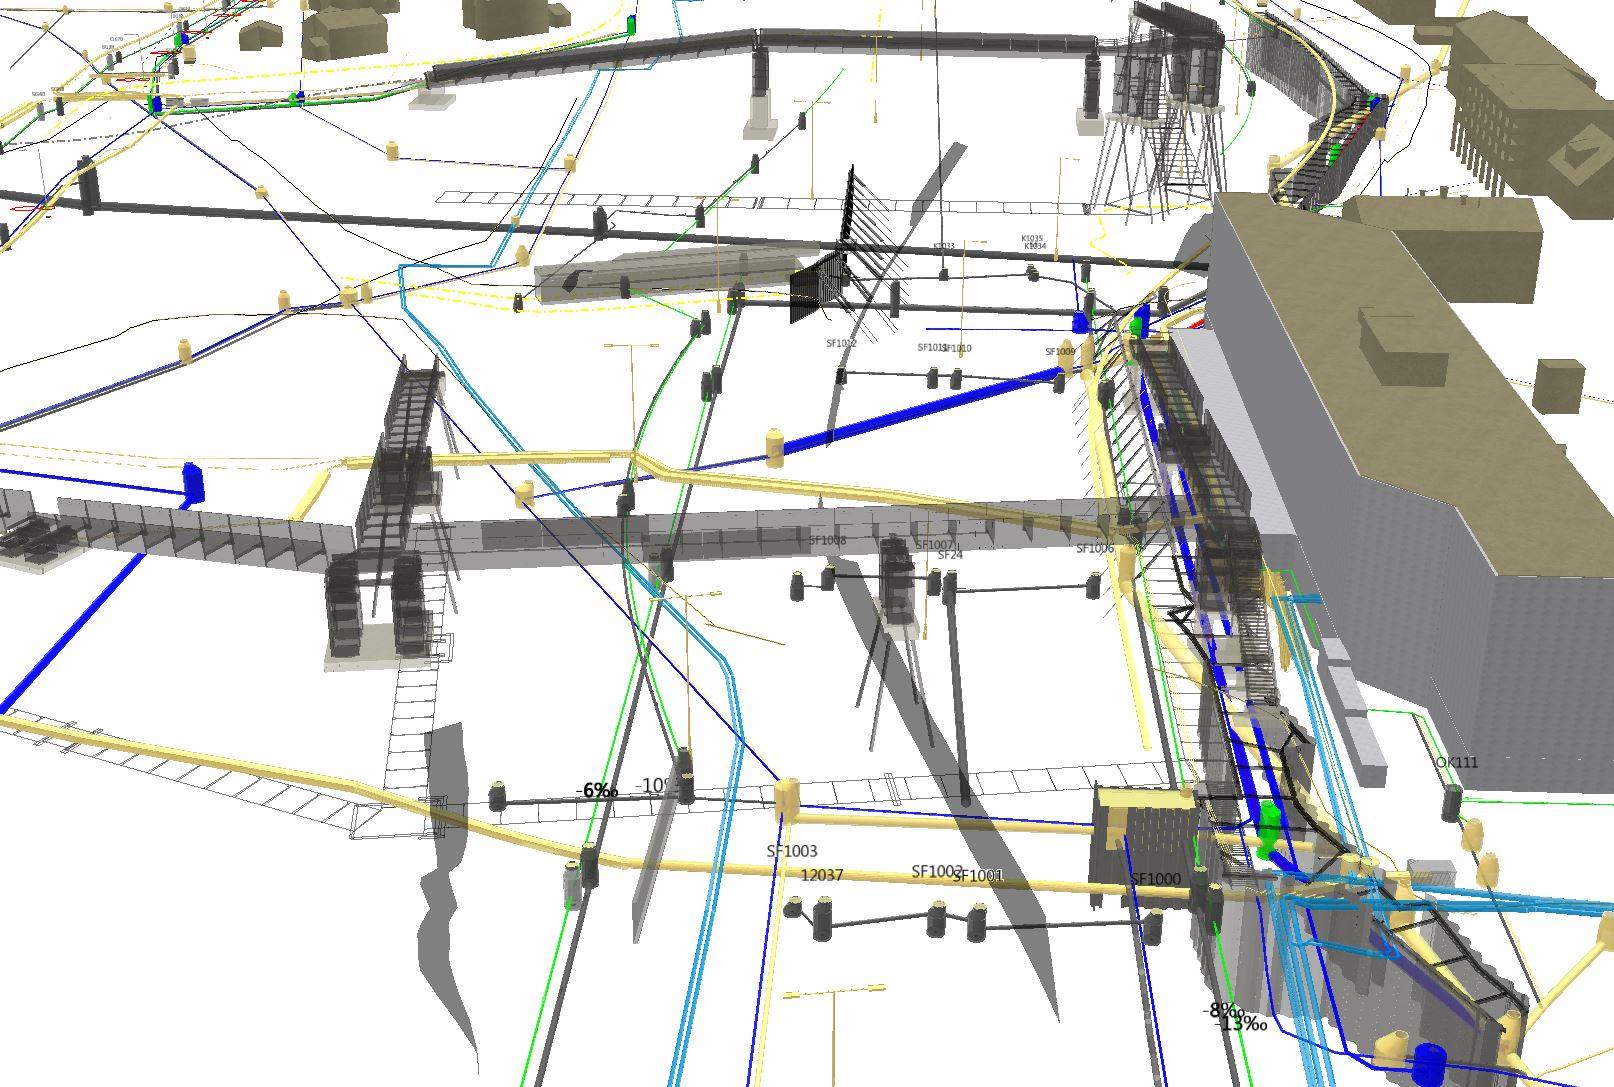 3d manholes and pipelines animated image from data captured